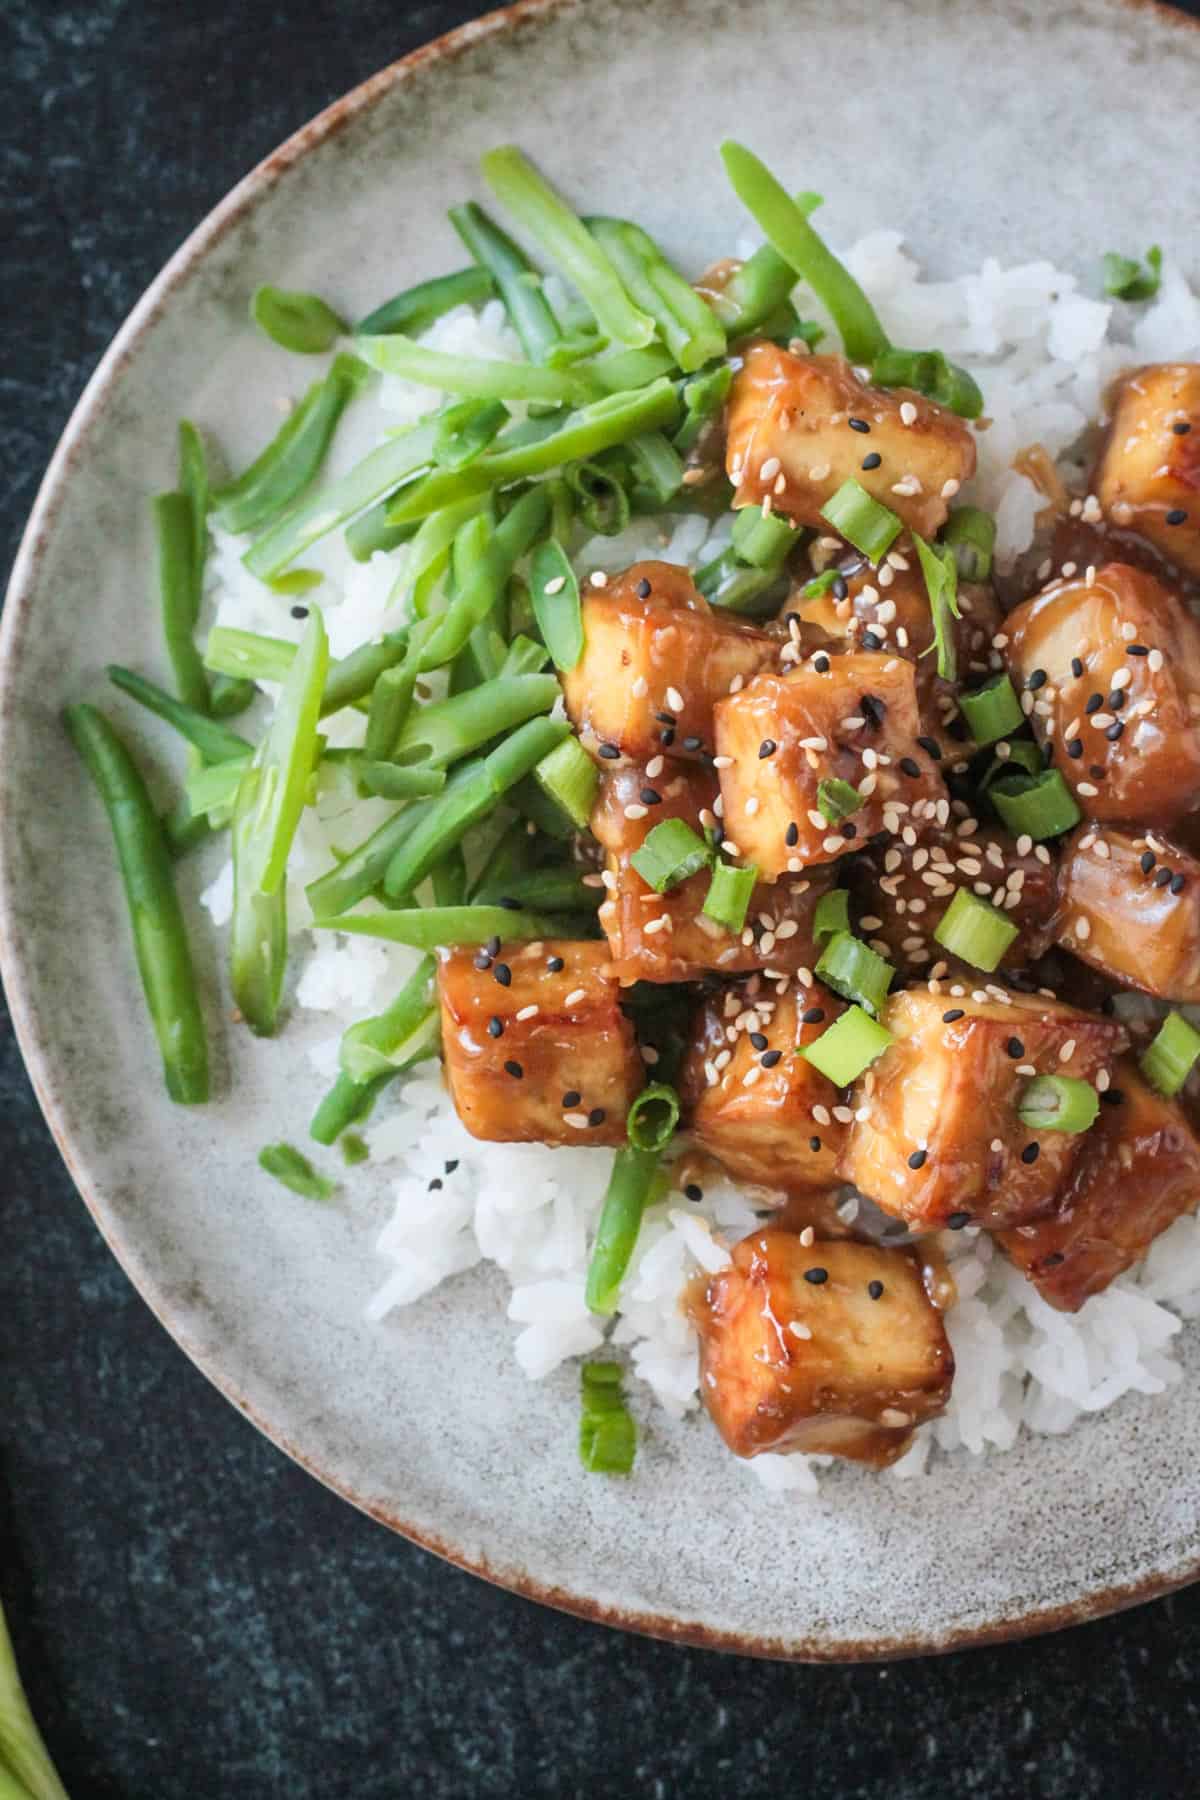 Bite size chunks of baked sesame ginger tofu over rice with green beans and garnished with scallions and sesame seeds.